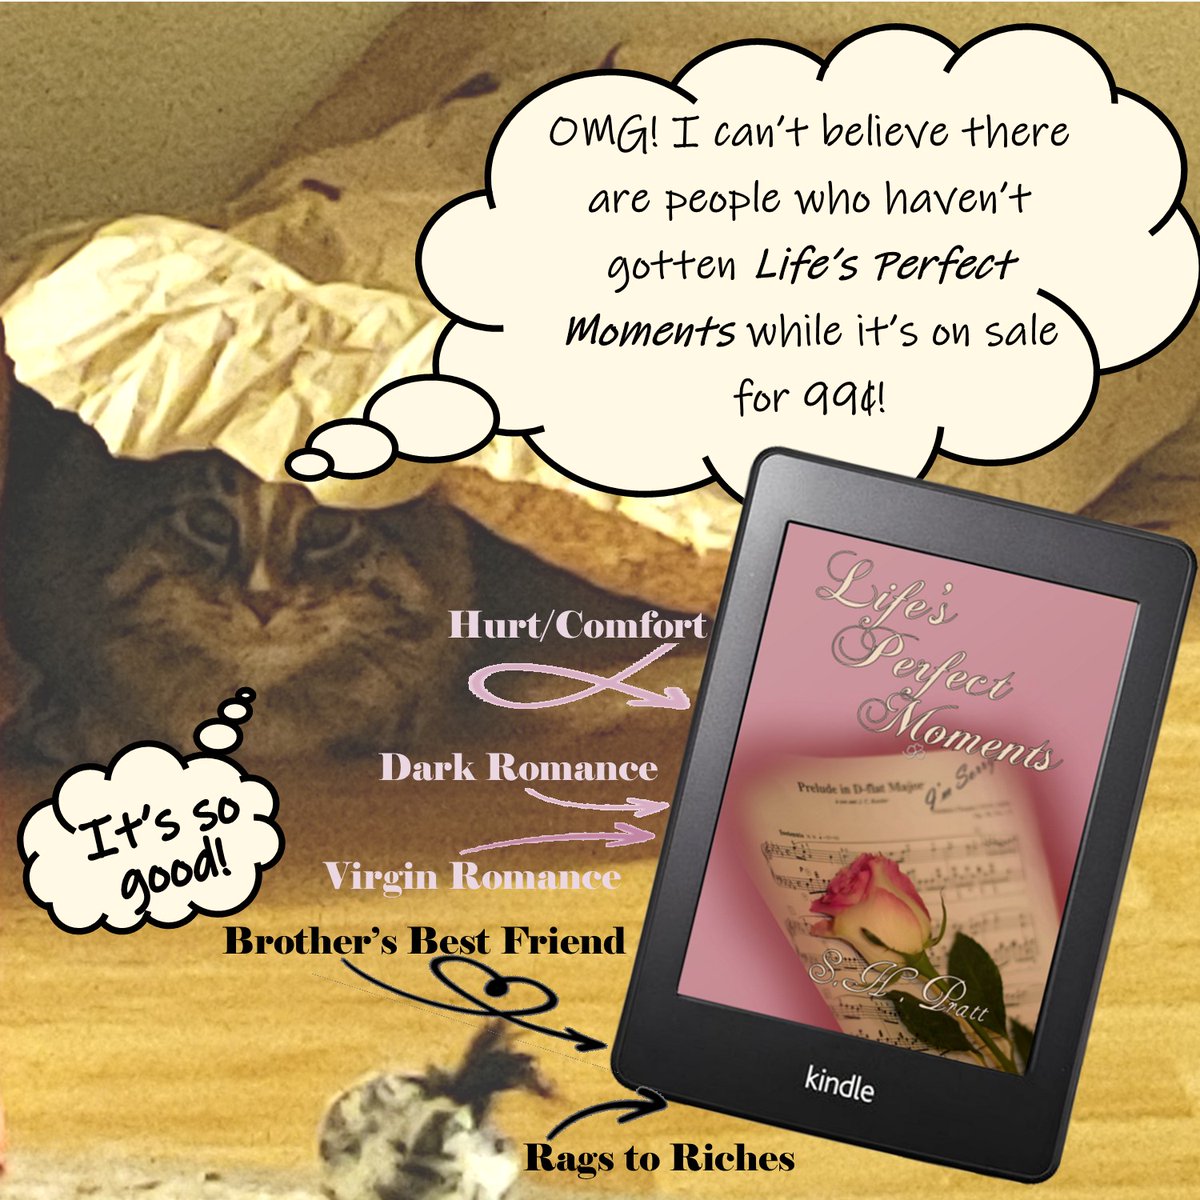 Cyrus gets so judgy on #caturday 😂
Have you picked up the spicy/dark April #bookofthemonth?
Life's Perfect Moments won't be 99¢ for much longer!
#darkromancereads #ragstoriches #brothersbestfriendromance #brothersbestfriend #hurtcomfortromance #hurtcomfort #contemporaryromance